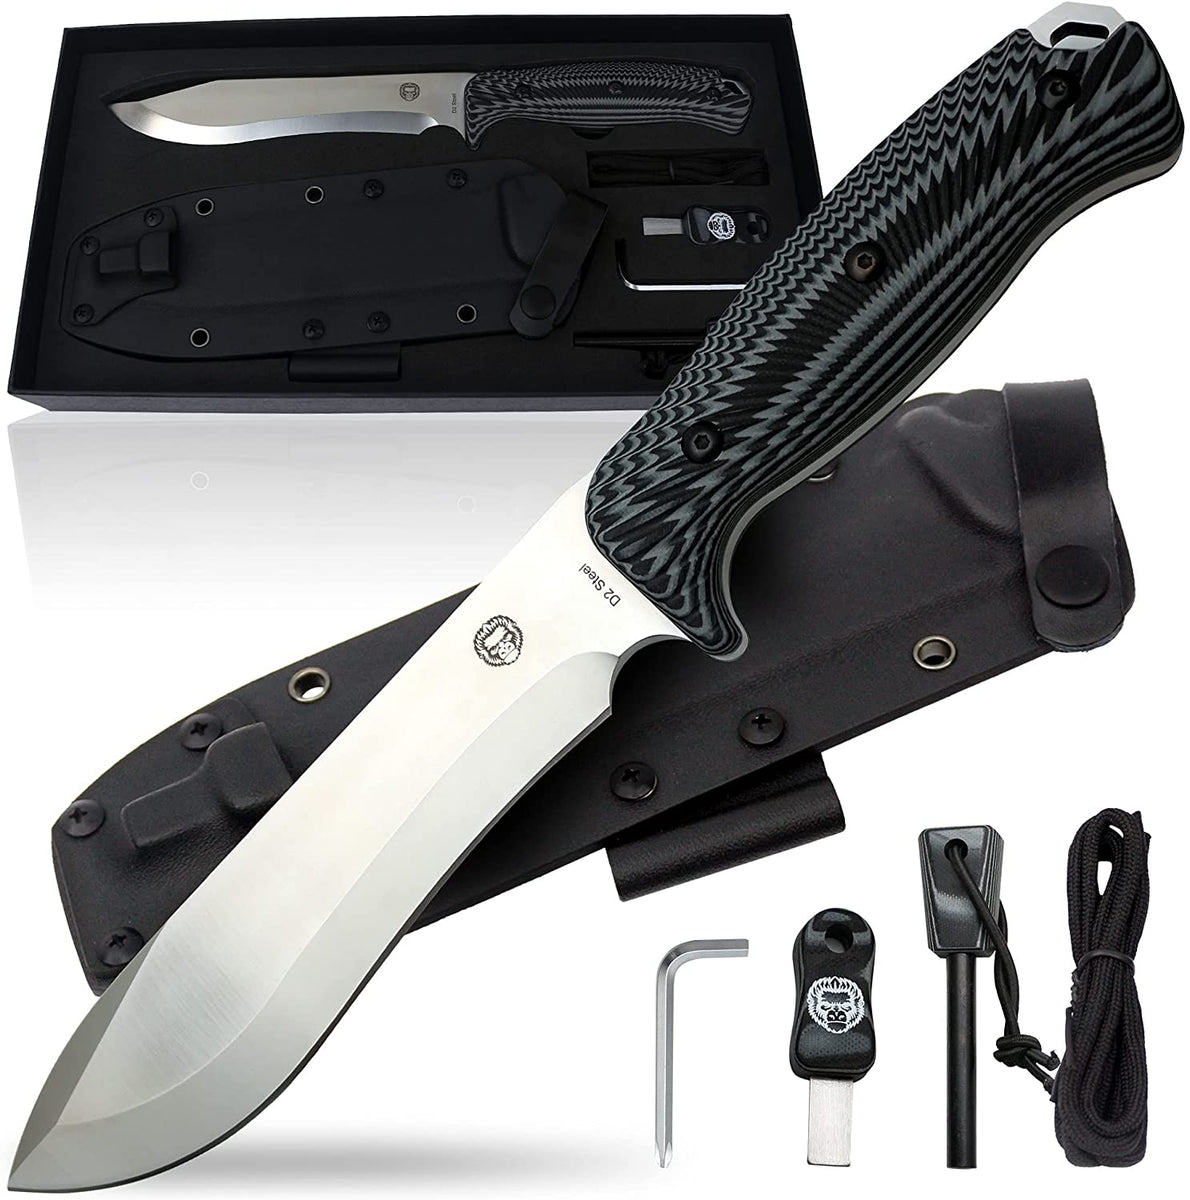 Large 1095 Survival Knife | FREE SHIPPING for $150 orders – Holtzman's  Gorilla Survival